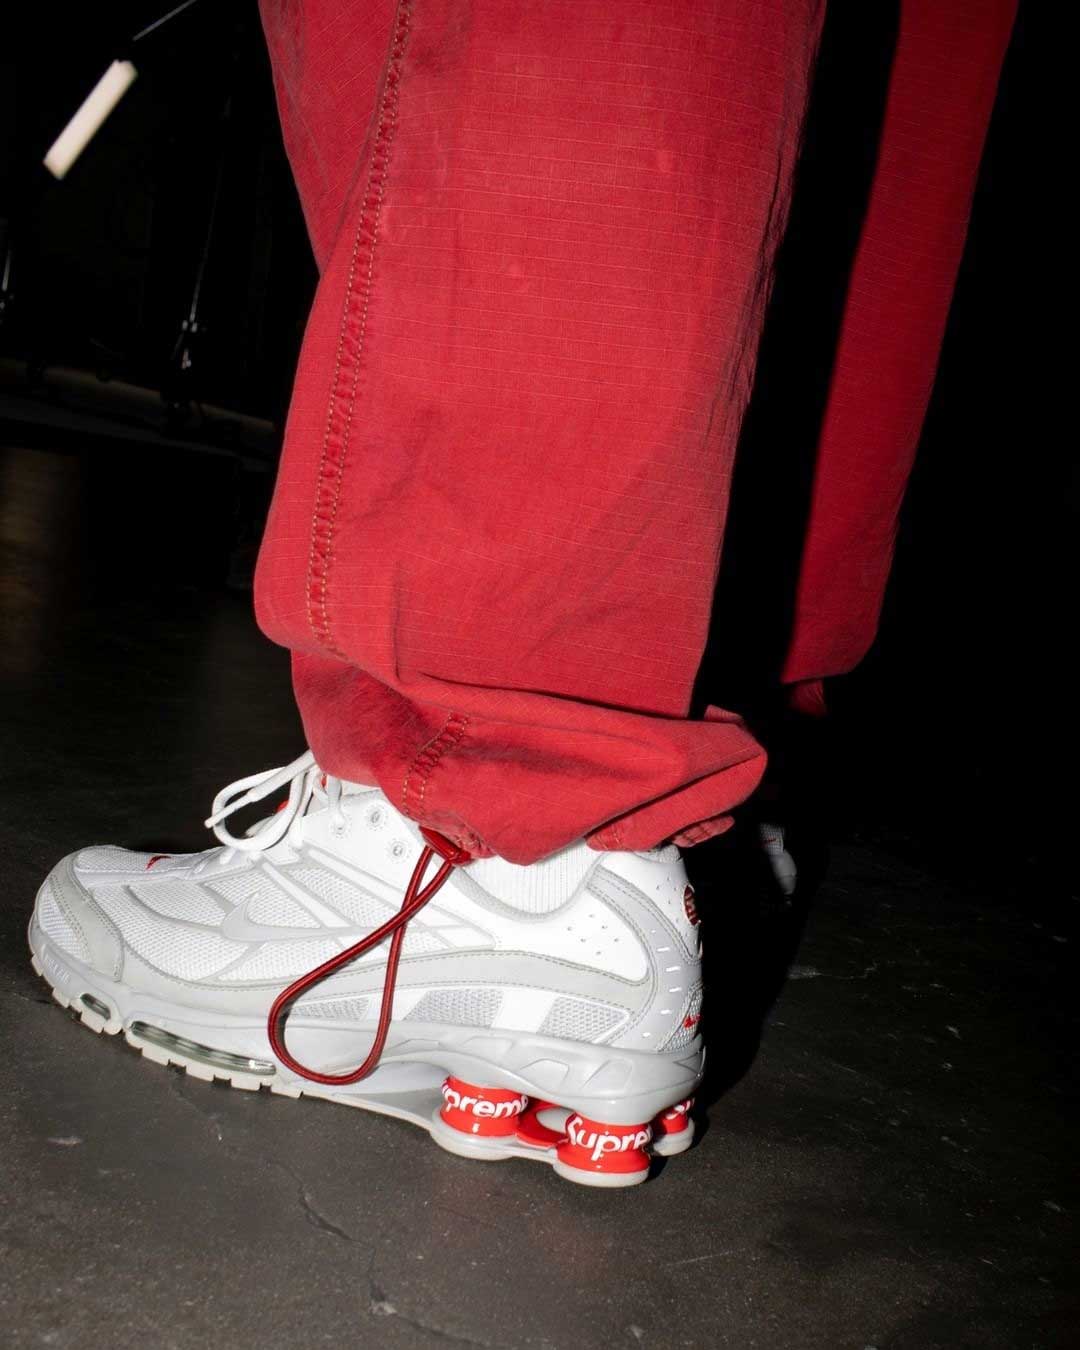 Nike Supreme x Shox Ride 2 Speed Red Sneakers